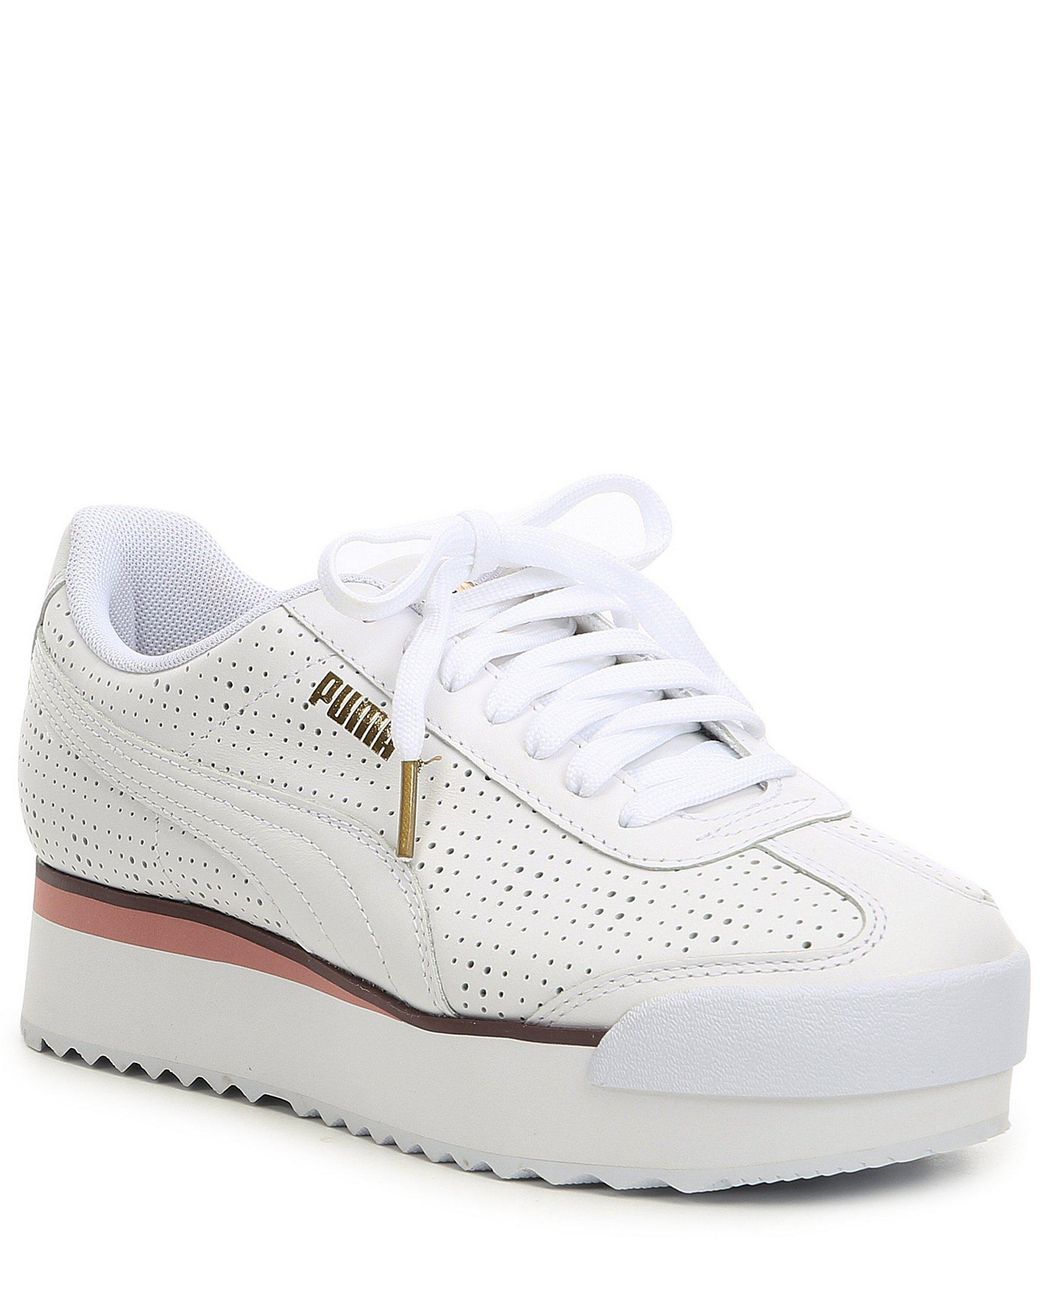 PUMA Women's Roma Amor Perforated Leather Platform Sneakers in White ...